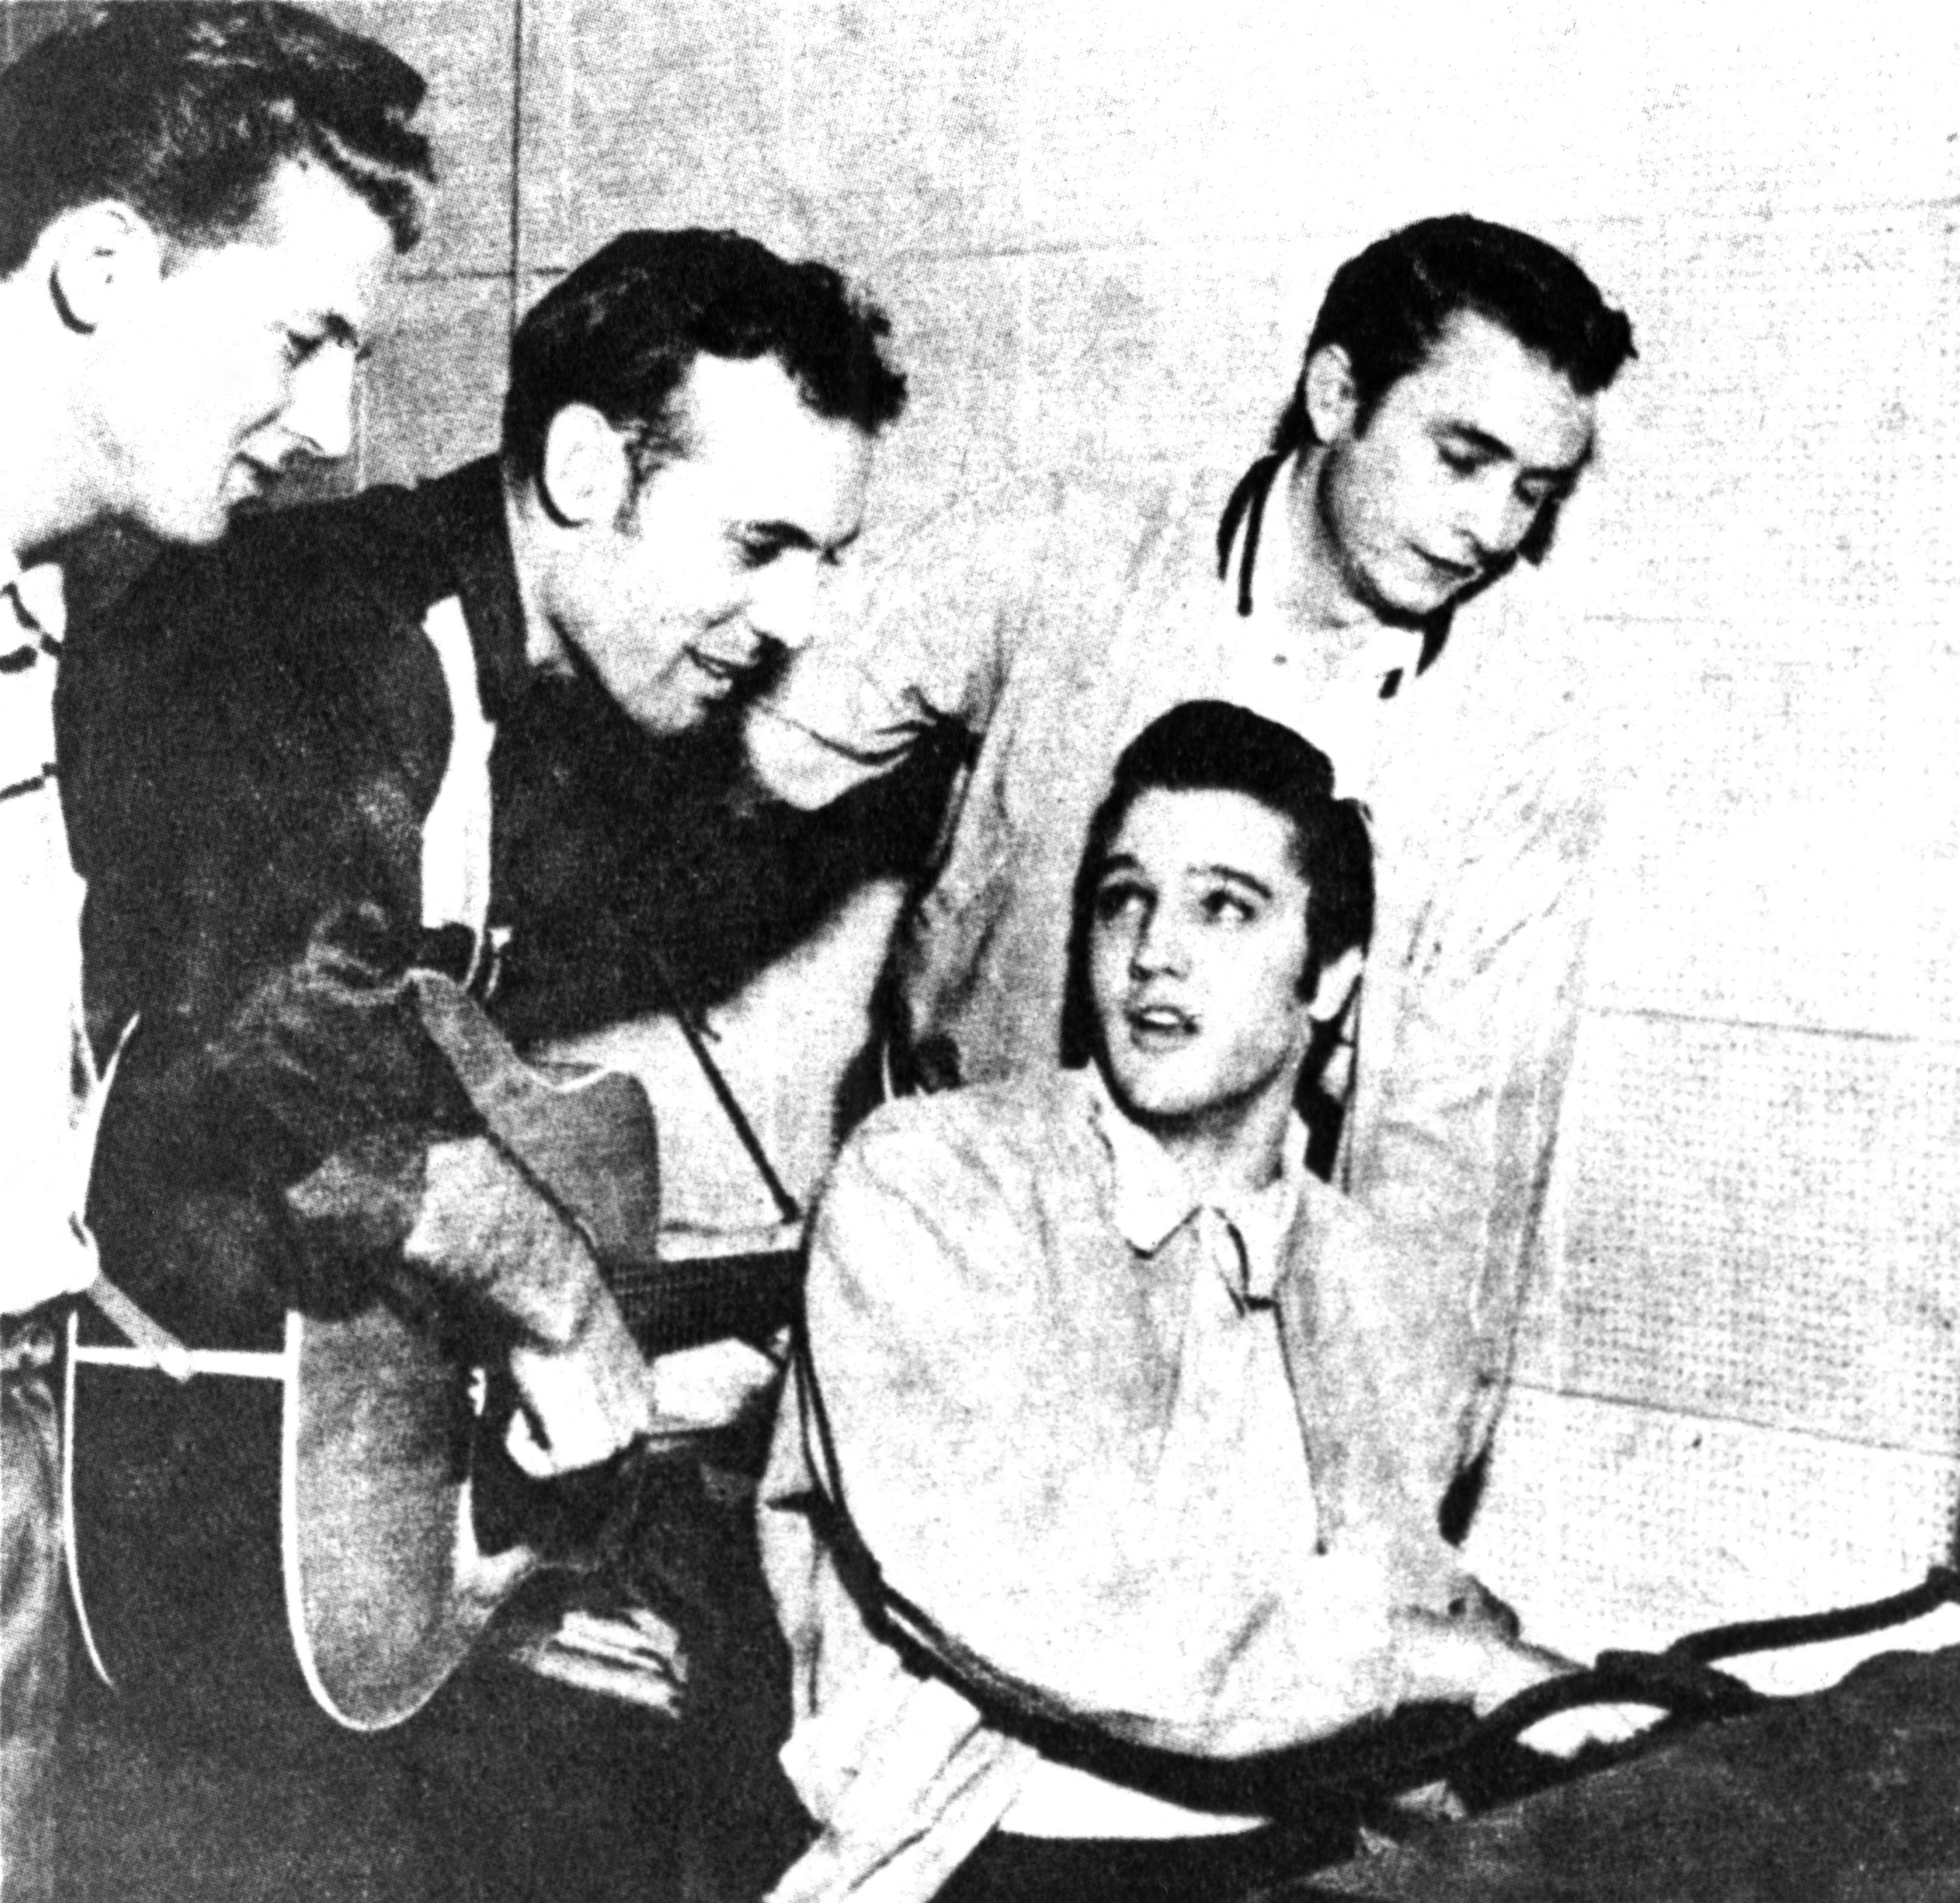 Jerry Lee Lewis, Carl Perkins, Elvis Presley, and Johnny Cash playing songs near a piano